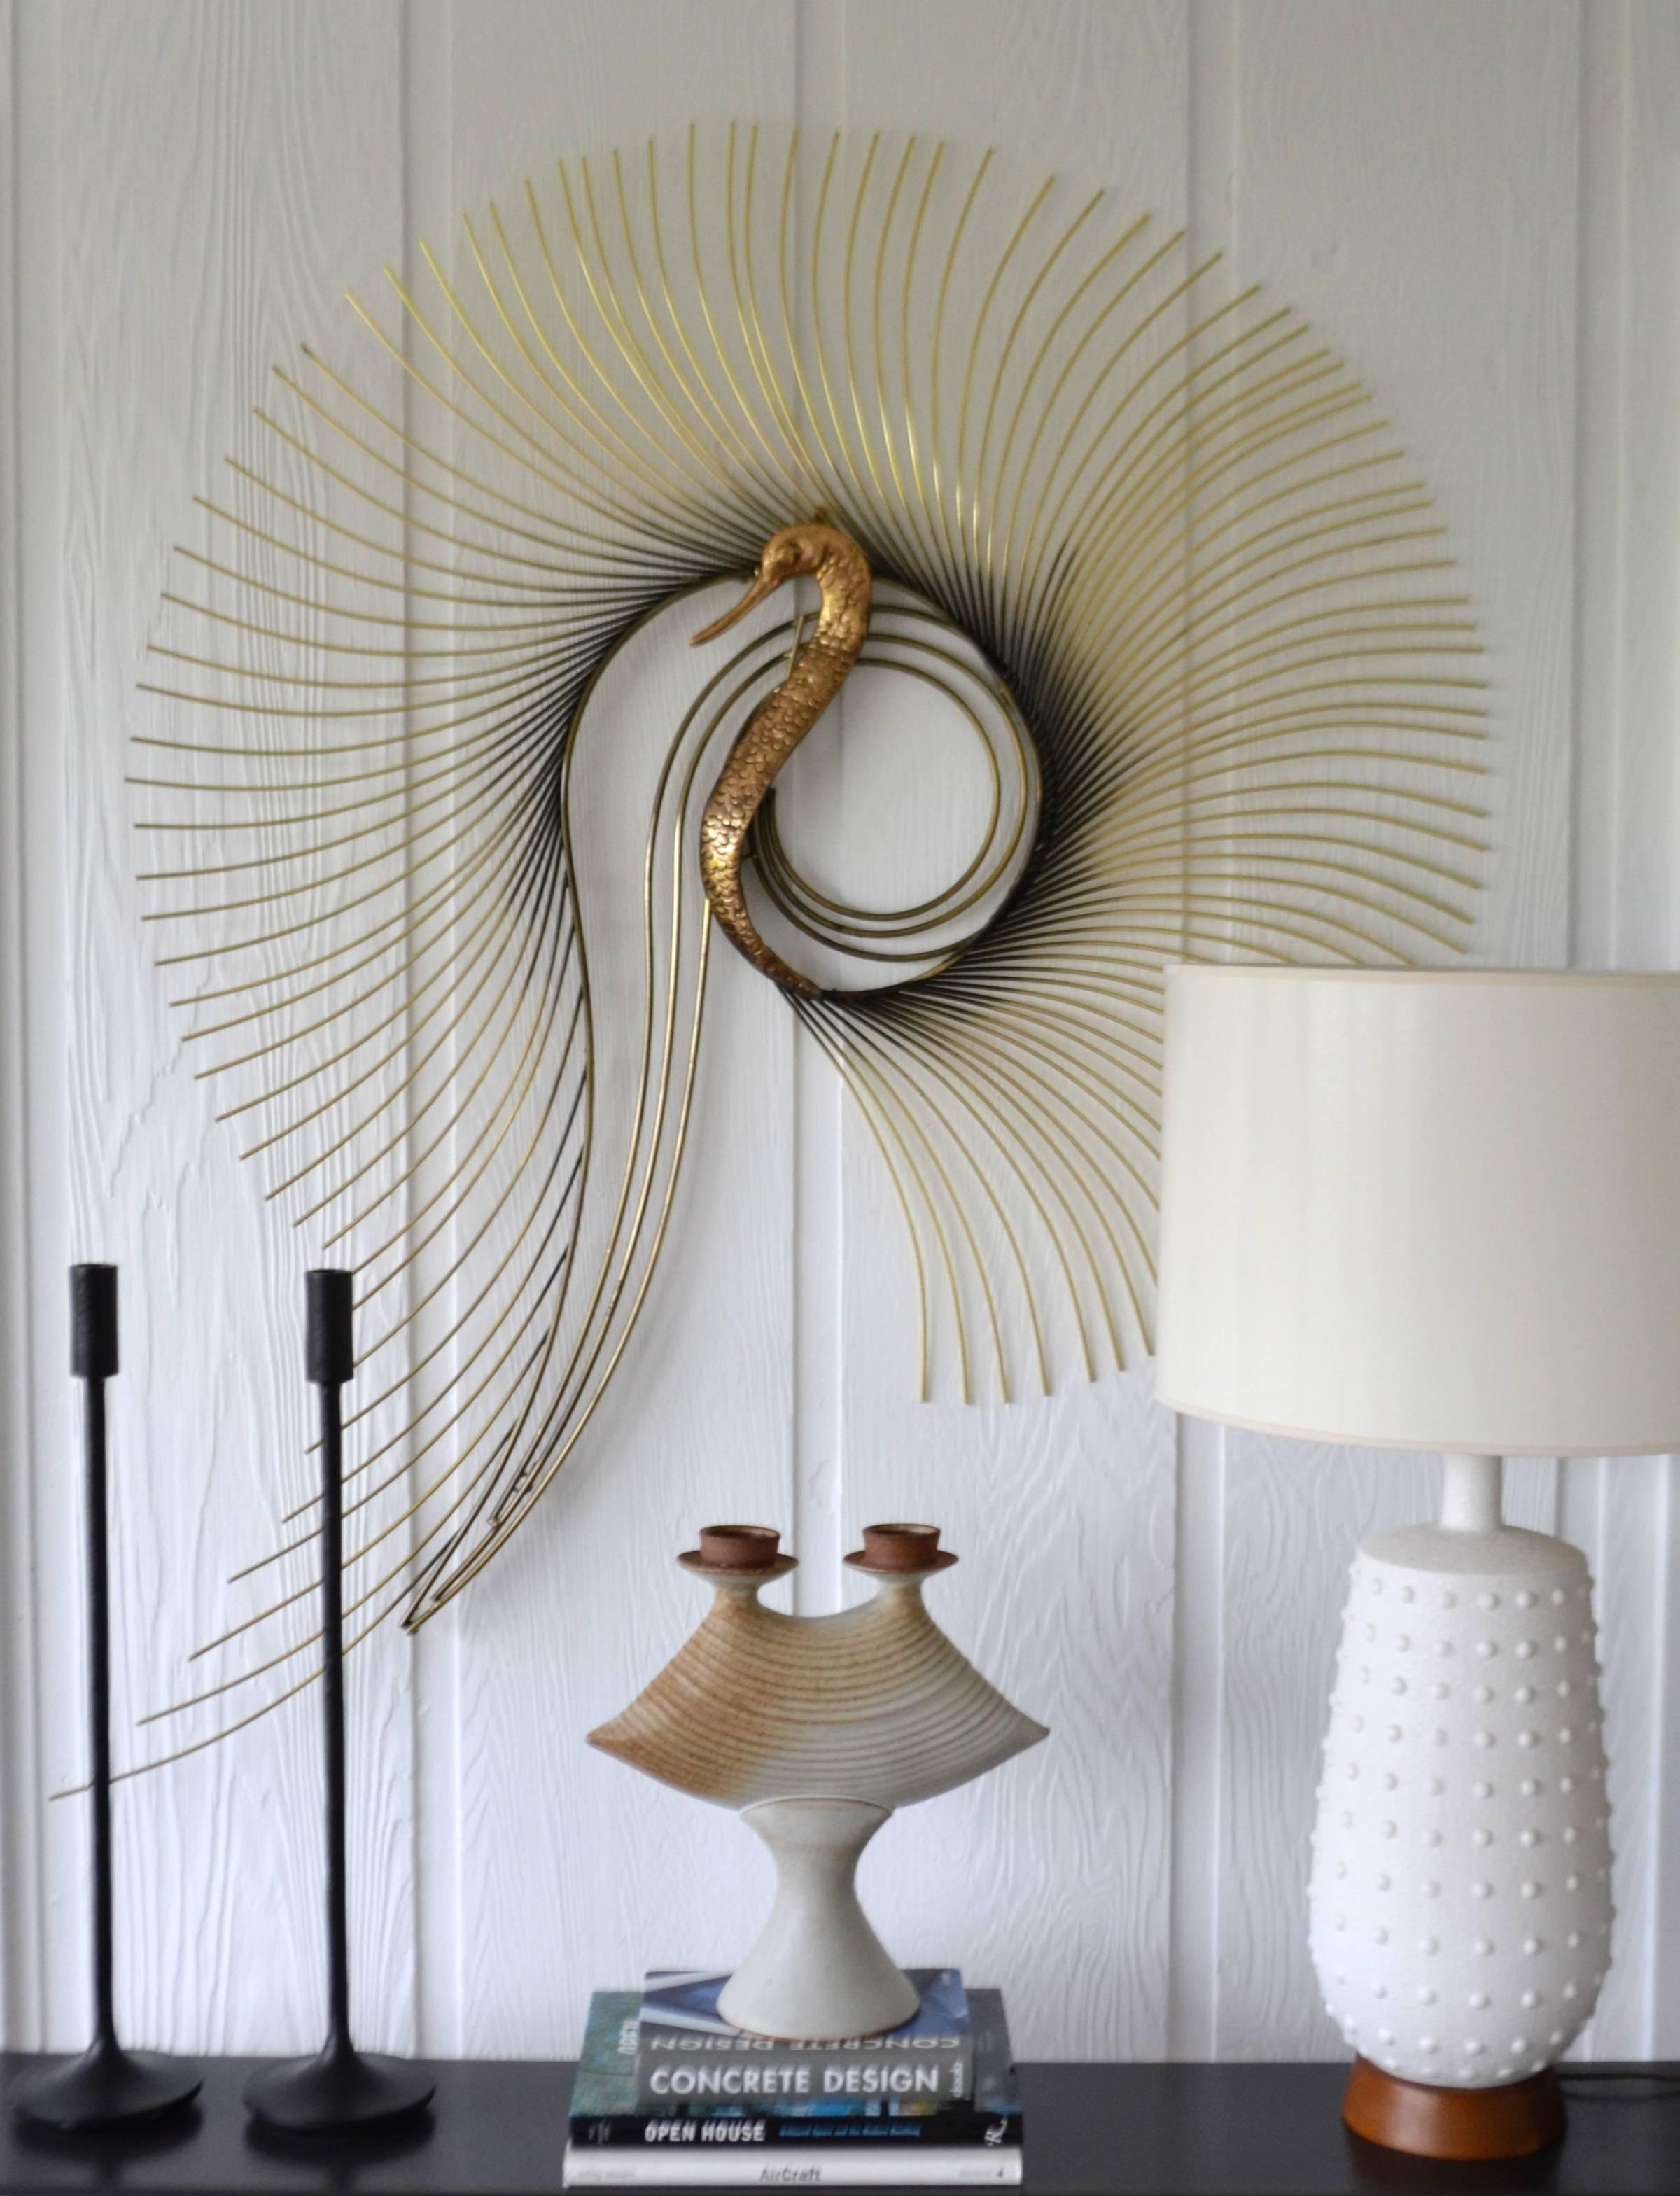 Glamorous midcentury brass peacock wall sculpture by Curtis Jere, circa 1987. This stunning large-scale artisan crafted sculpture is designed with a polished brass body and heavy gauge brass rods creating a stylized spiraling feathering effect.